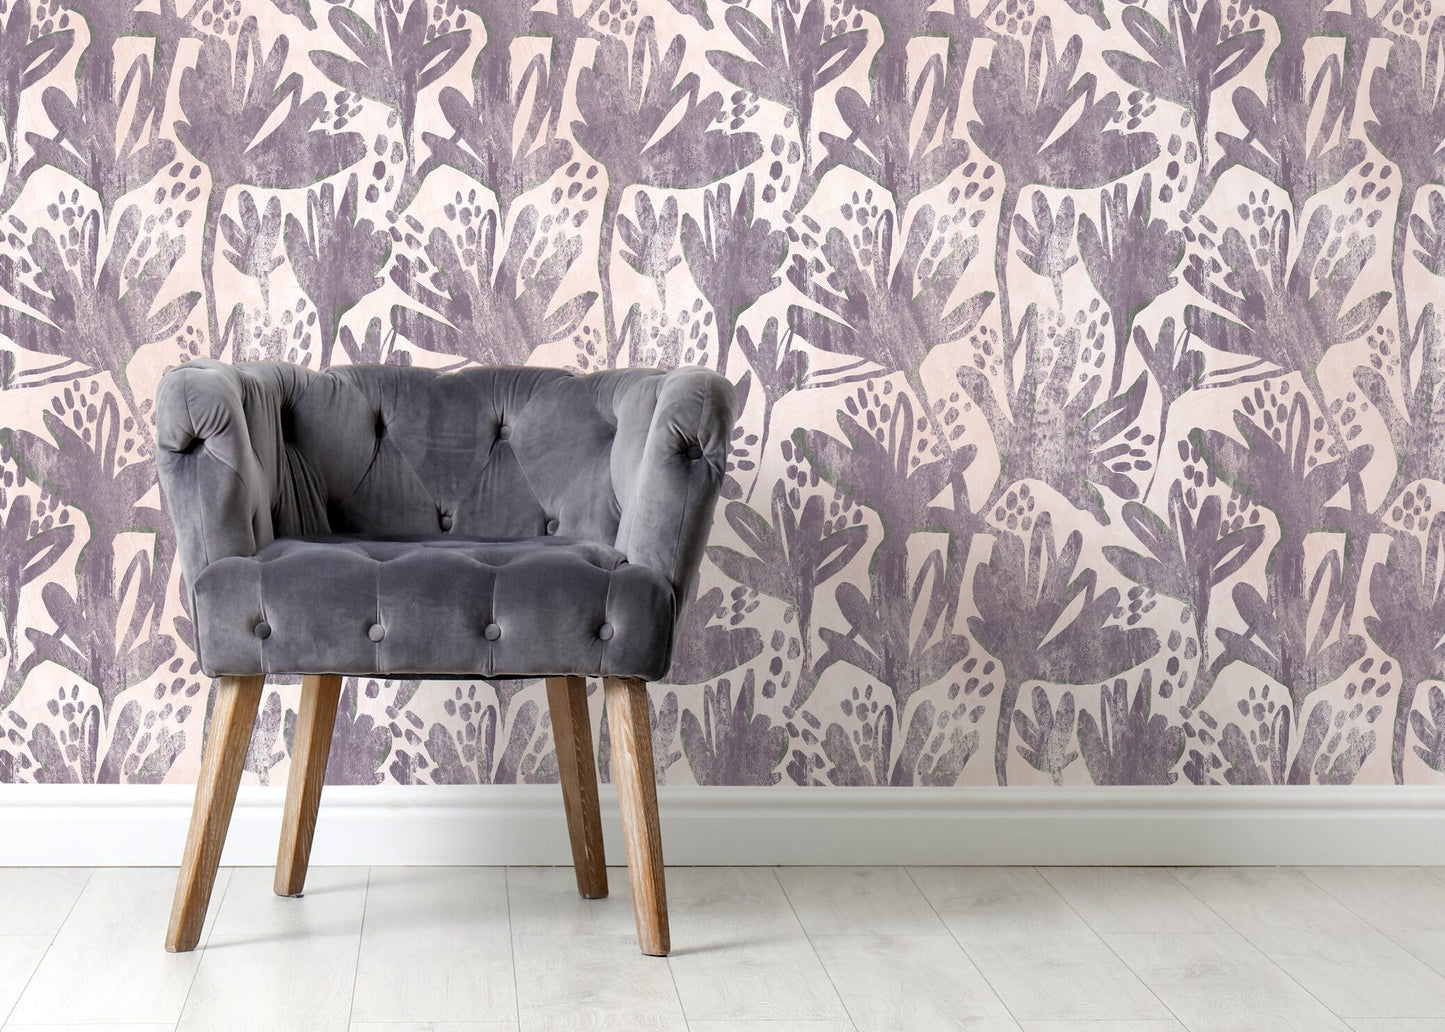 Purple Floral Hand Painted Wallpaper / Peel and Stick Wallpaper Removable Wallpaper Home Decor Wall Art Wall Decor Room Decor - C903